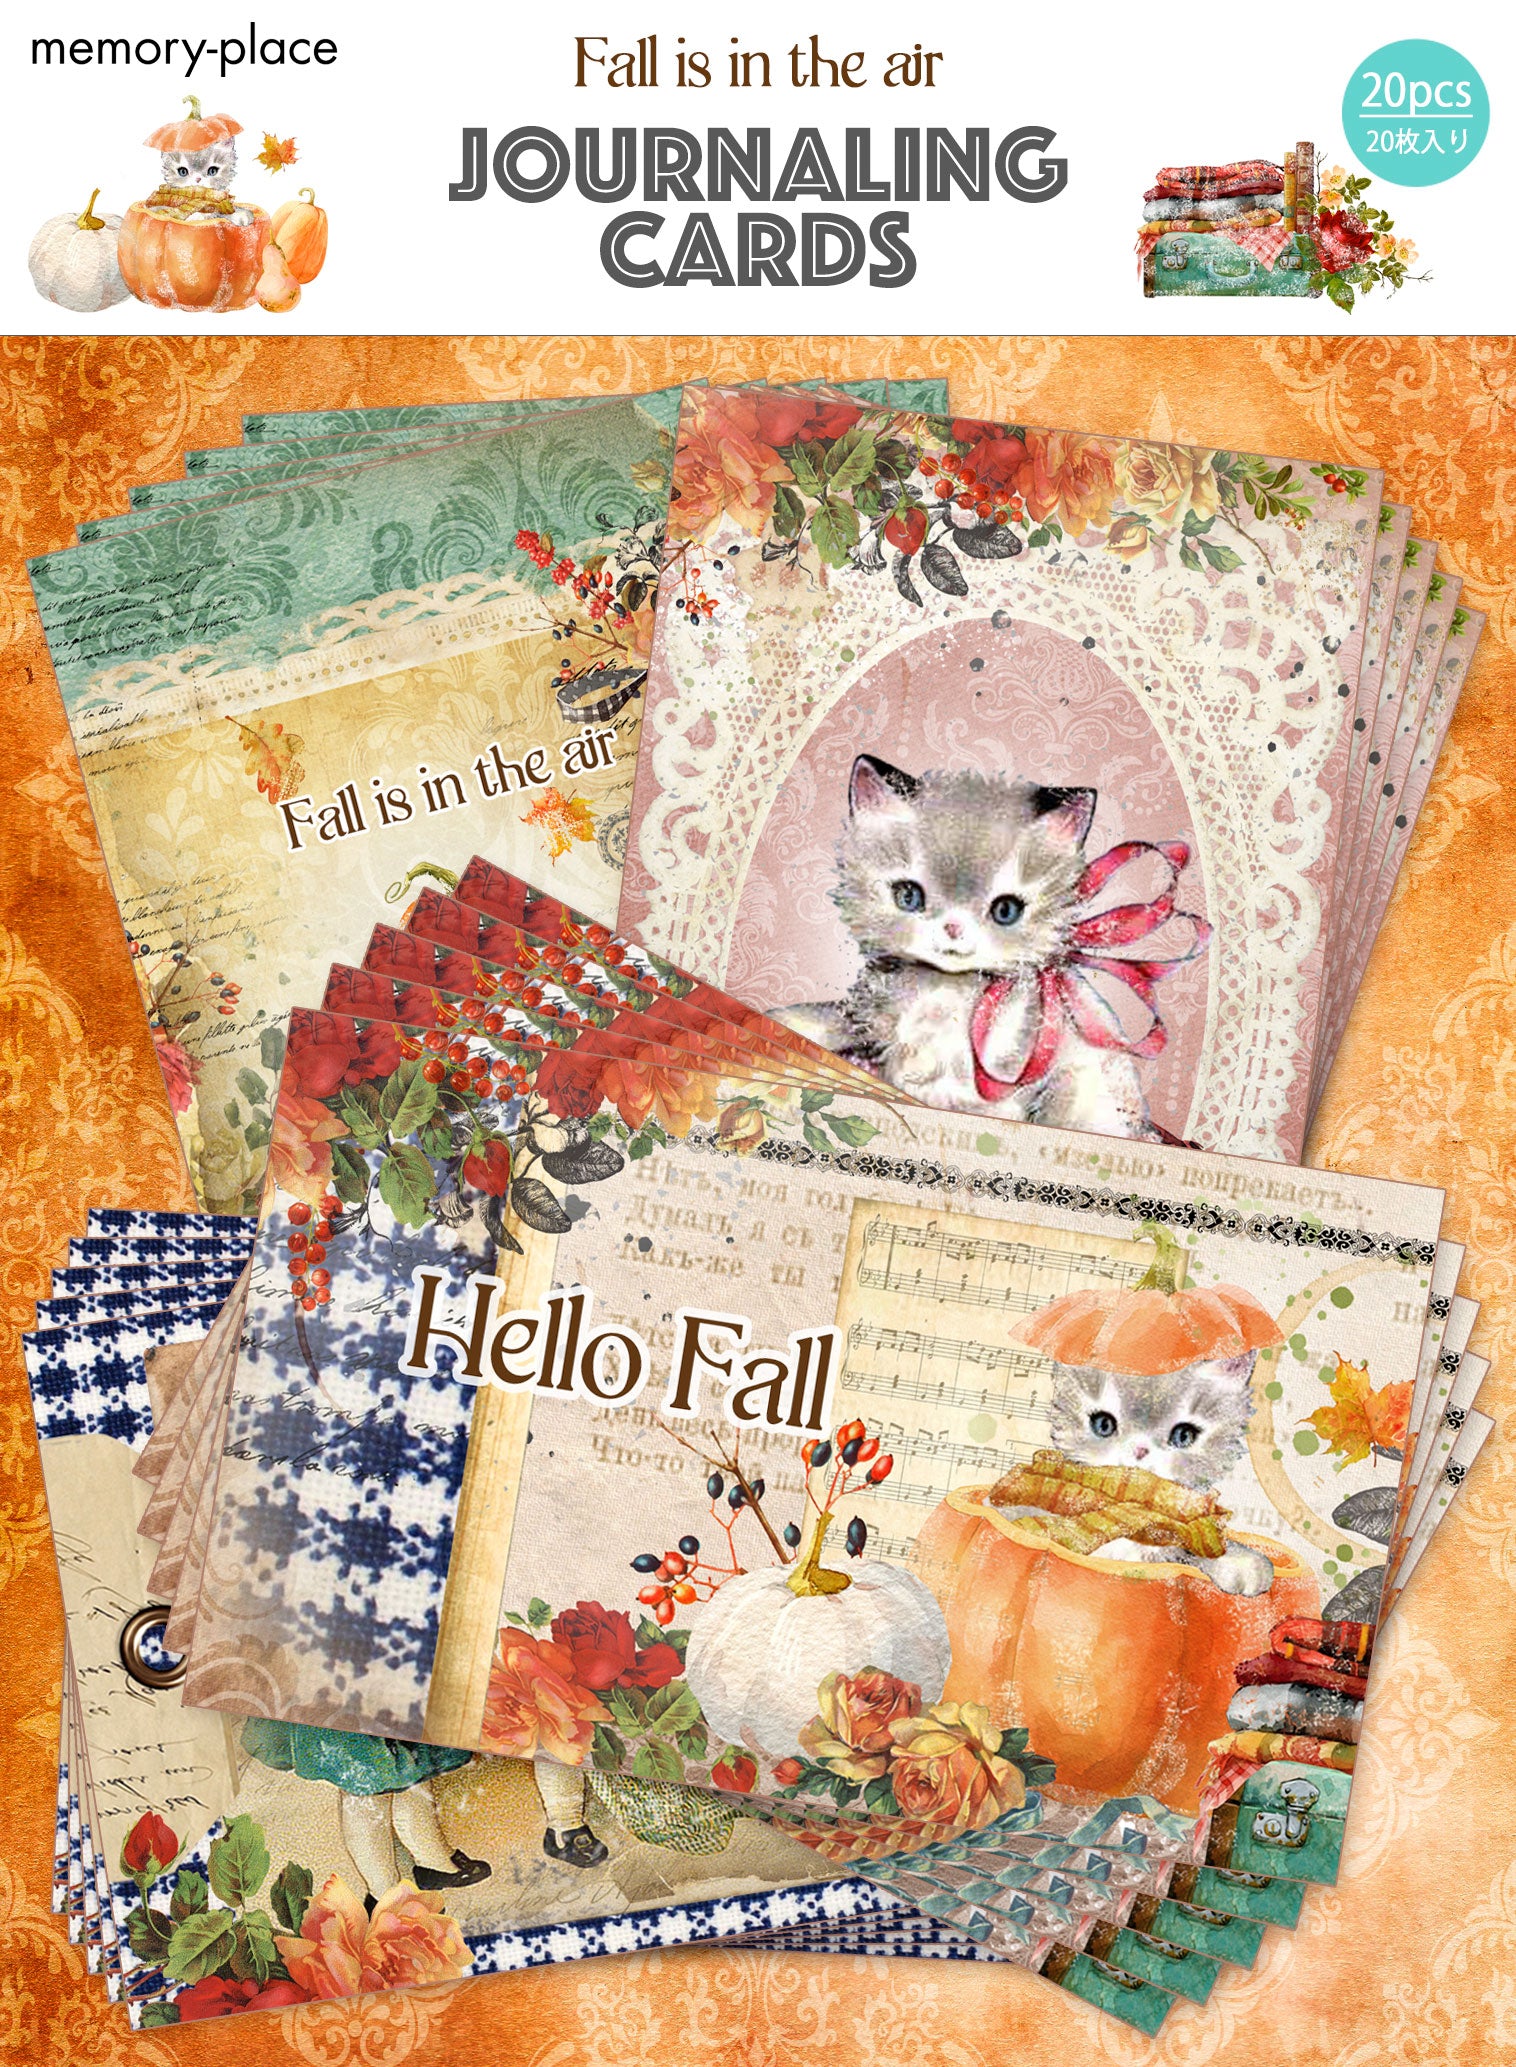 Journal Cards - Fall Is In The Air - Memory Place - Asuka Studio